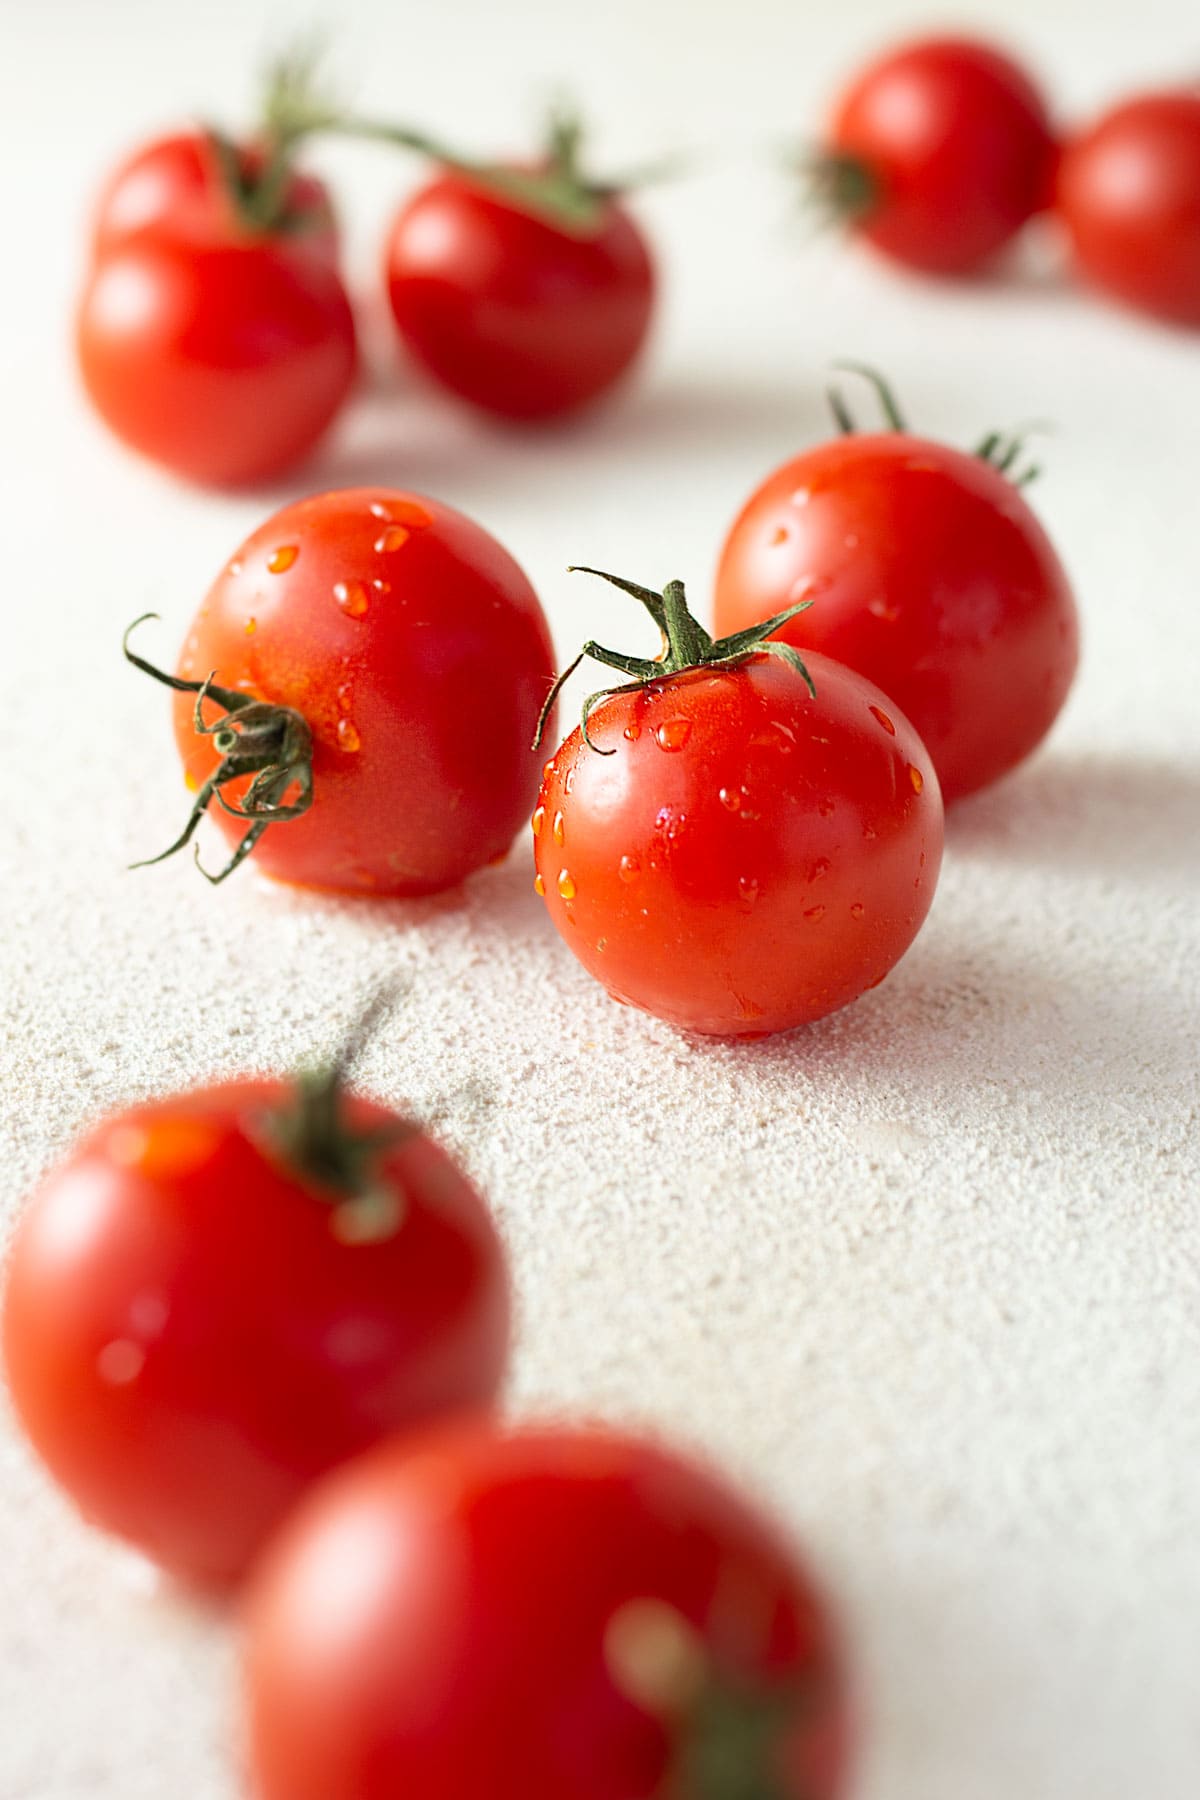 Straight on close up view of a group of compari tomatoes with water droplets on them.